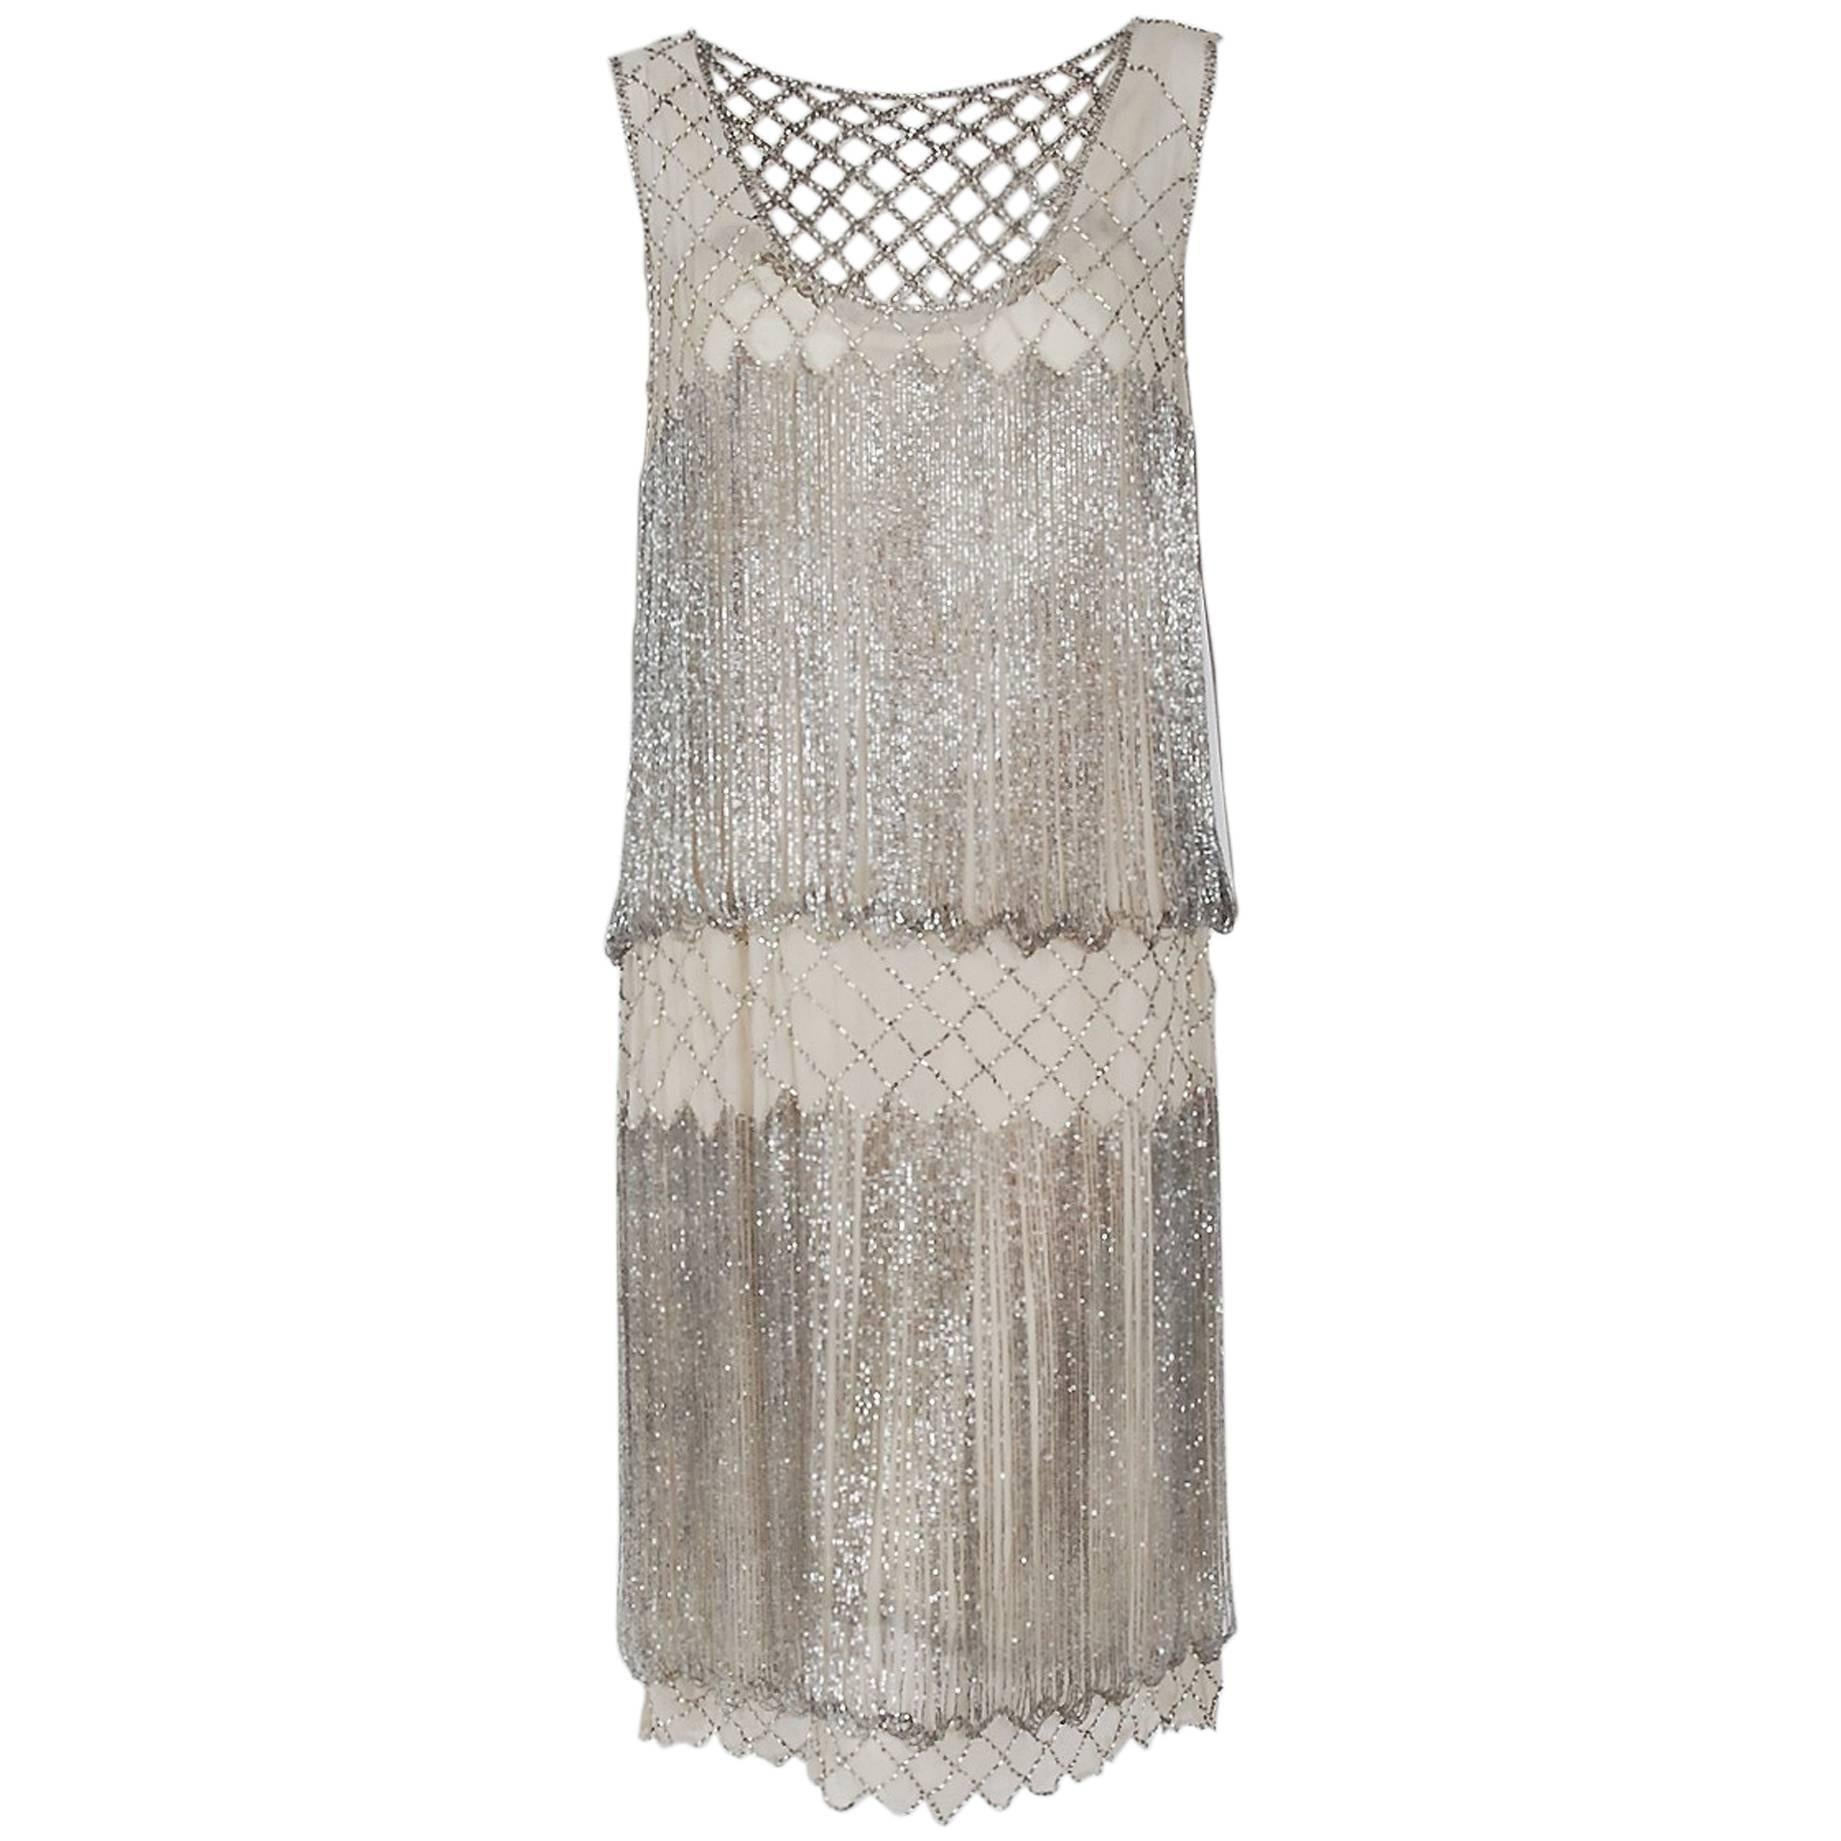 1920's French Couture Beaded Fringe Ivory Silk Chiffon Cut-Out Flapper Dress 